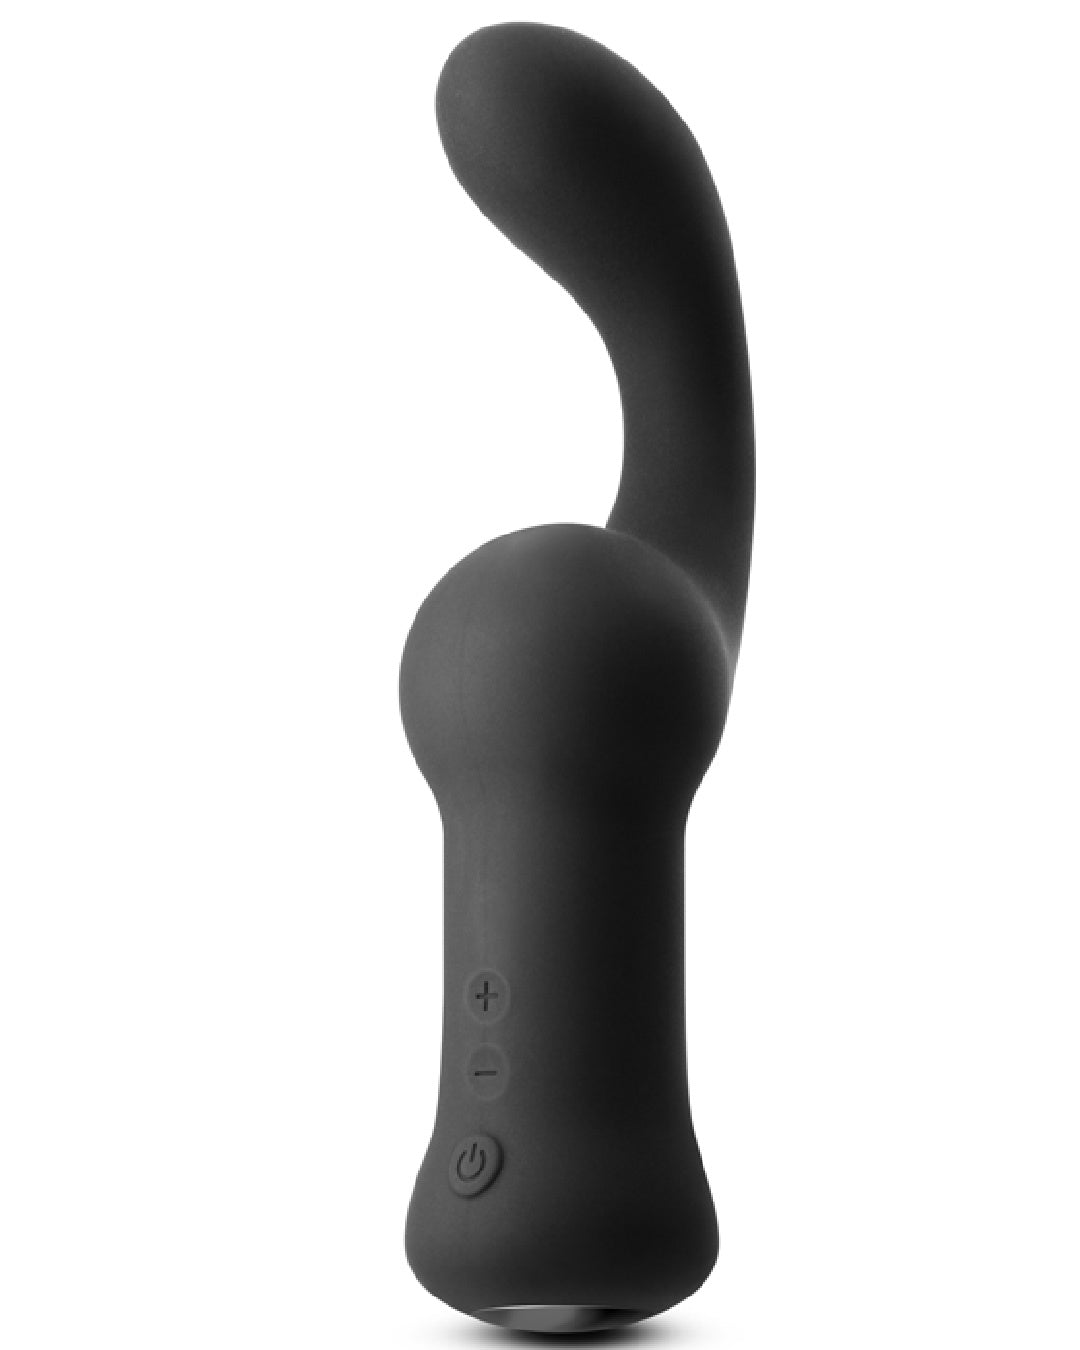 Renegade Curve Vibrating Prostate Massager sideview on white background 